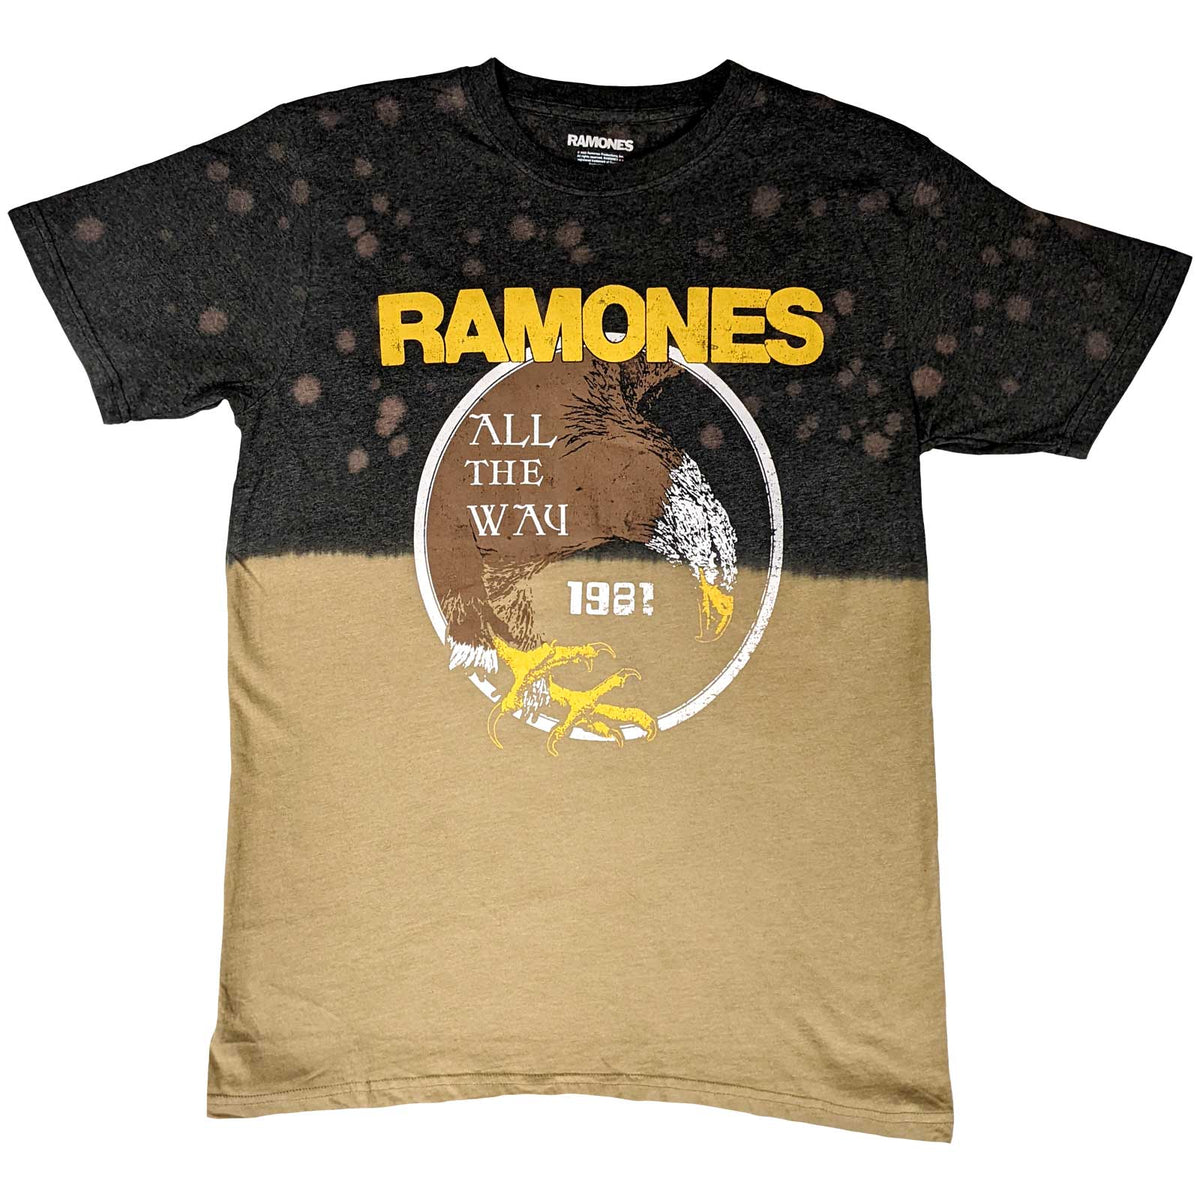 T-shirt Ramones pour adulte – All The Way (Wash Collection) – Design sous licence officielle